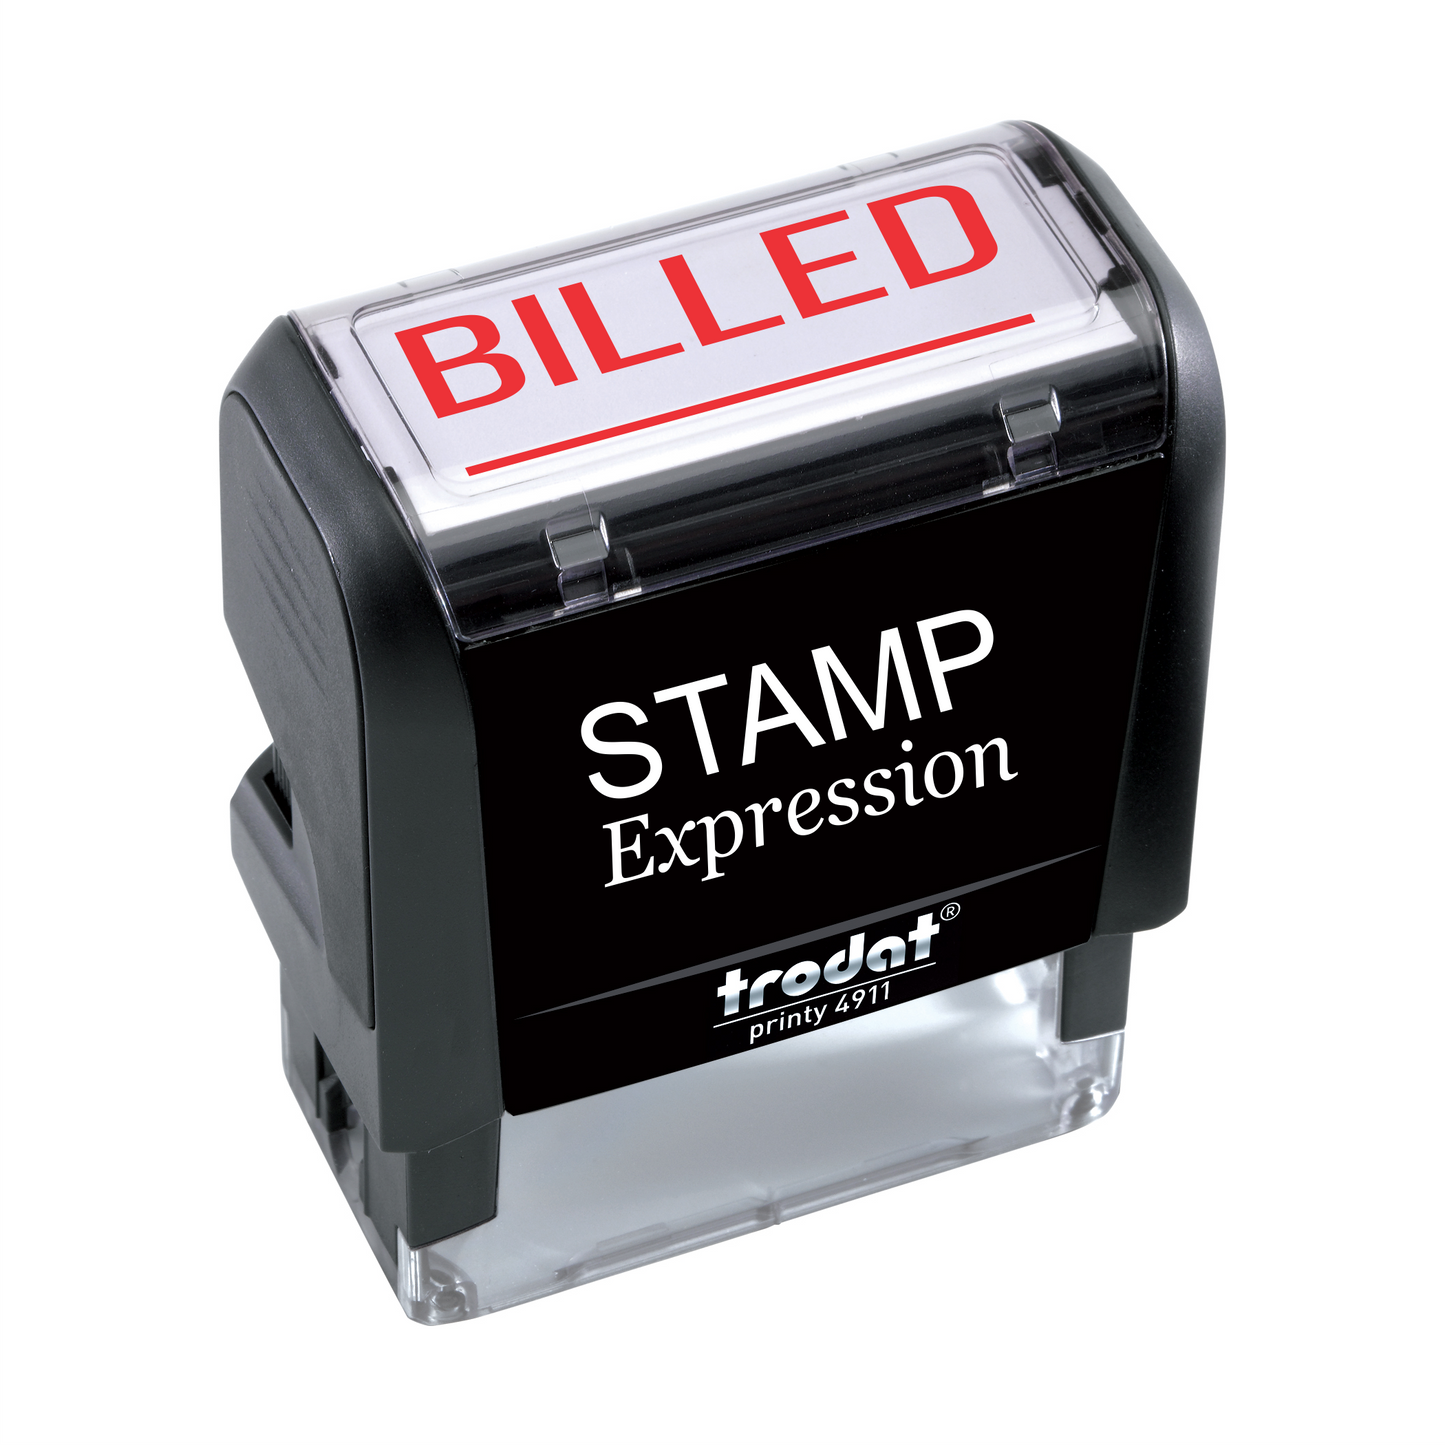 Billed with Line Office Self Inking Rubber Stamp (SH-5227)